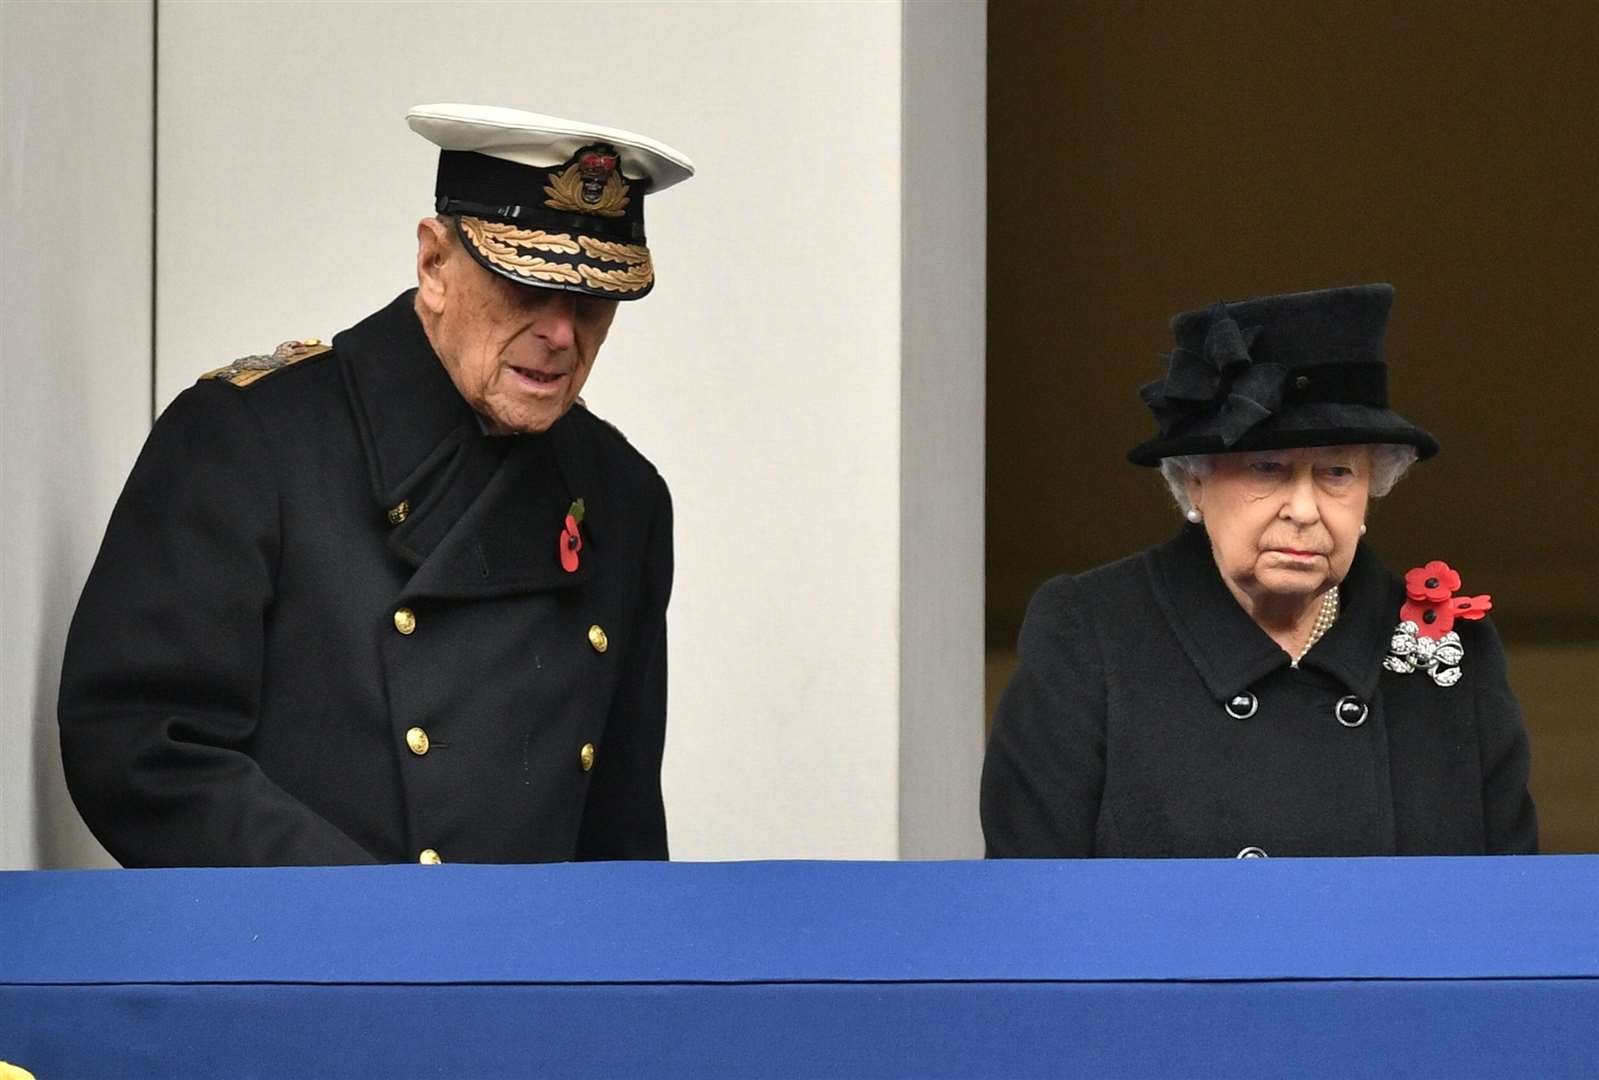 The Queen and the Duke of Edinburgh observe the annual Remembrance Sunday Service at the Cenotaph memorial from a balcony in Whitehall (Dominic Lipinski/PA)